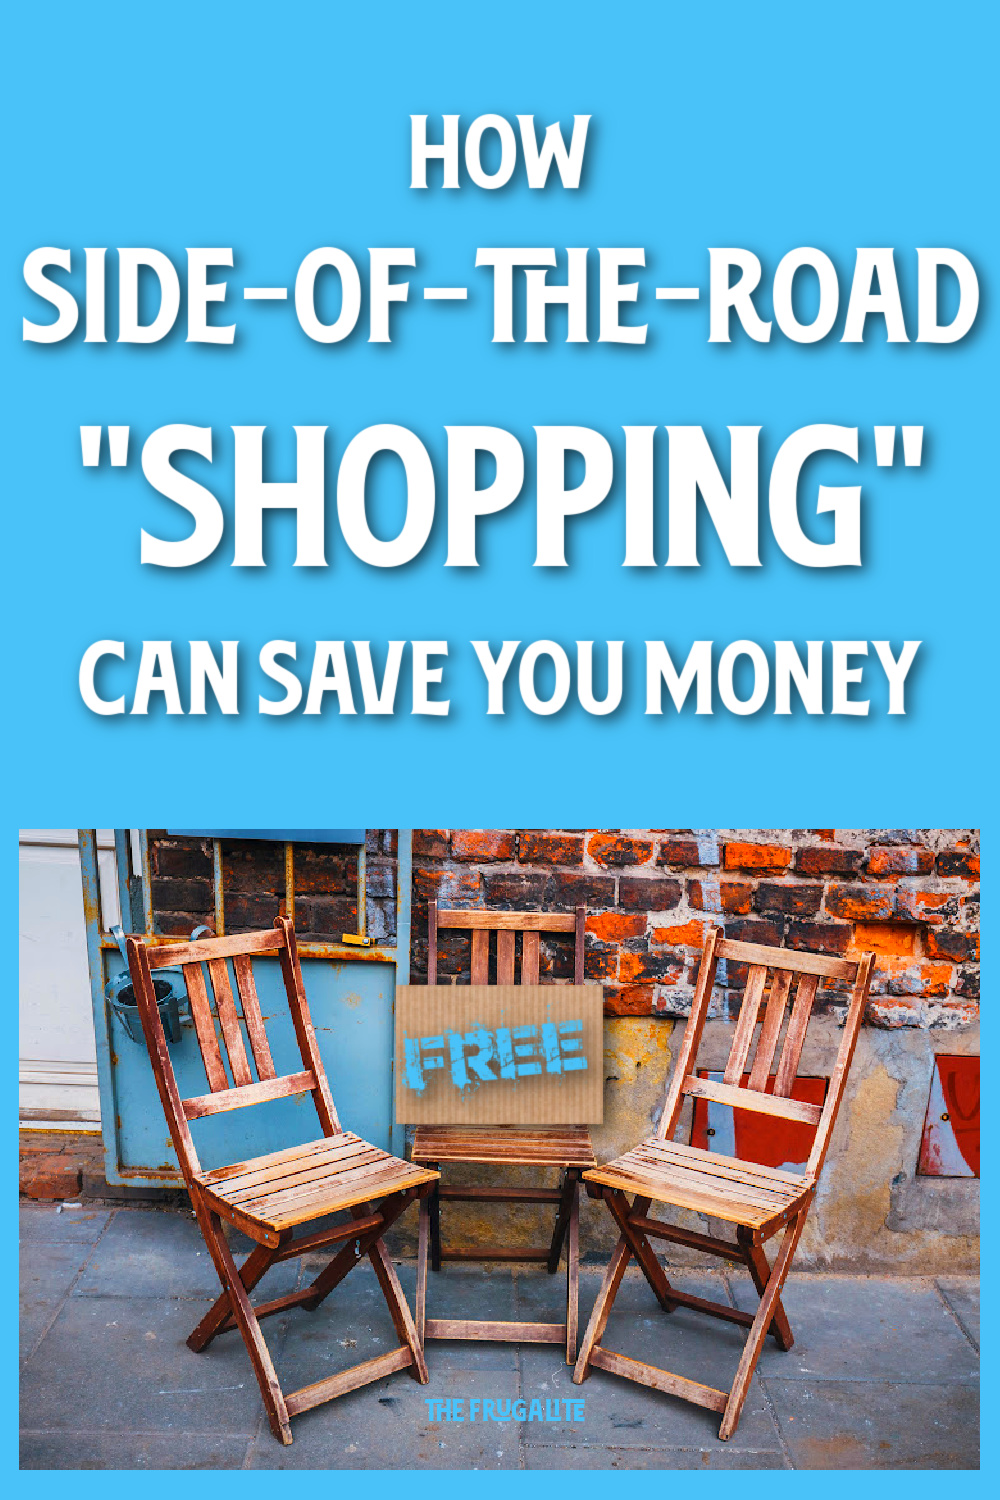 How Side-of-the-Road Shopping Can Save Money